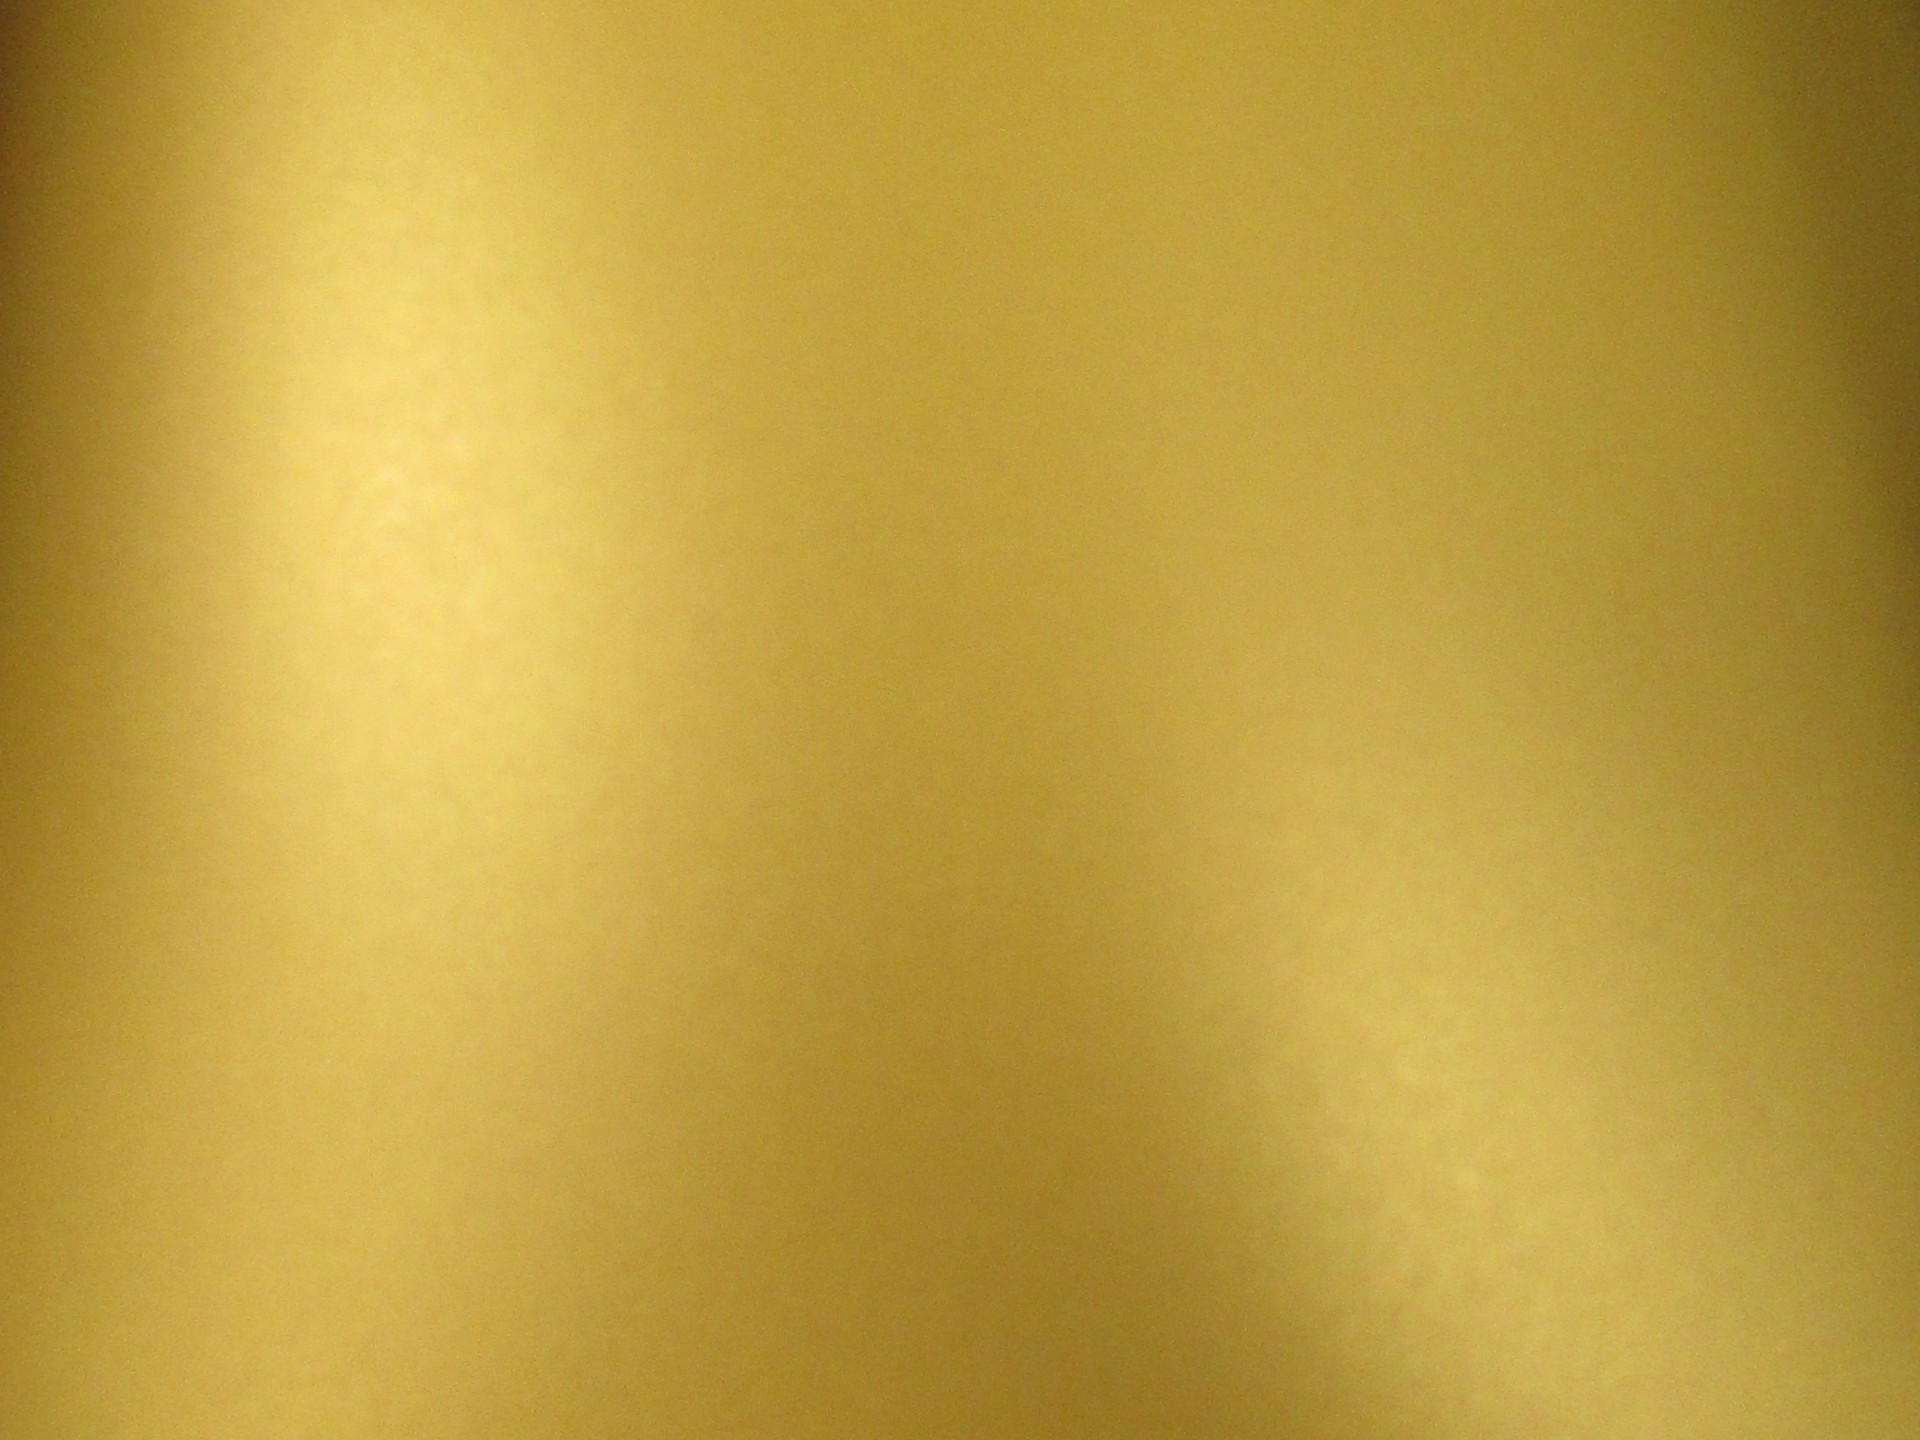 Gold,shiny,aged,background,texture - free image from 